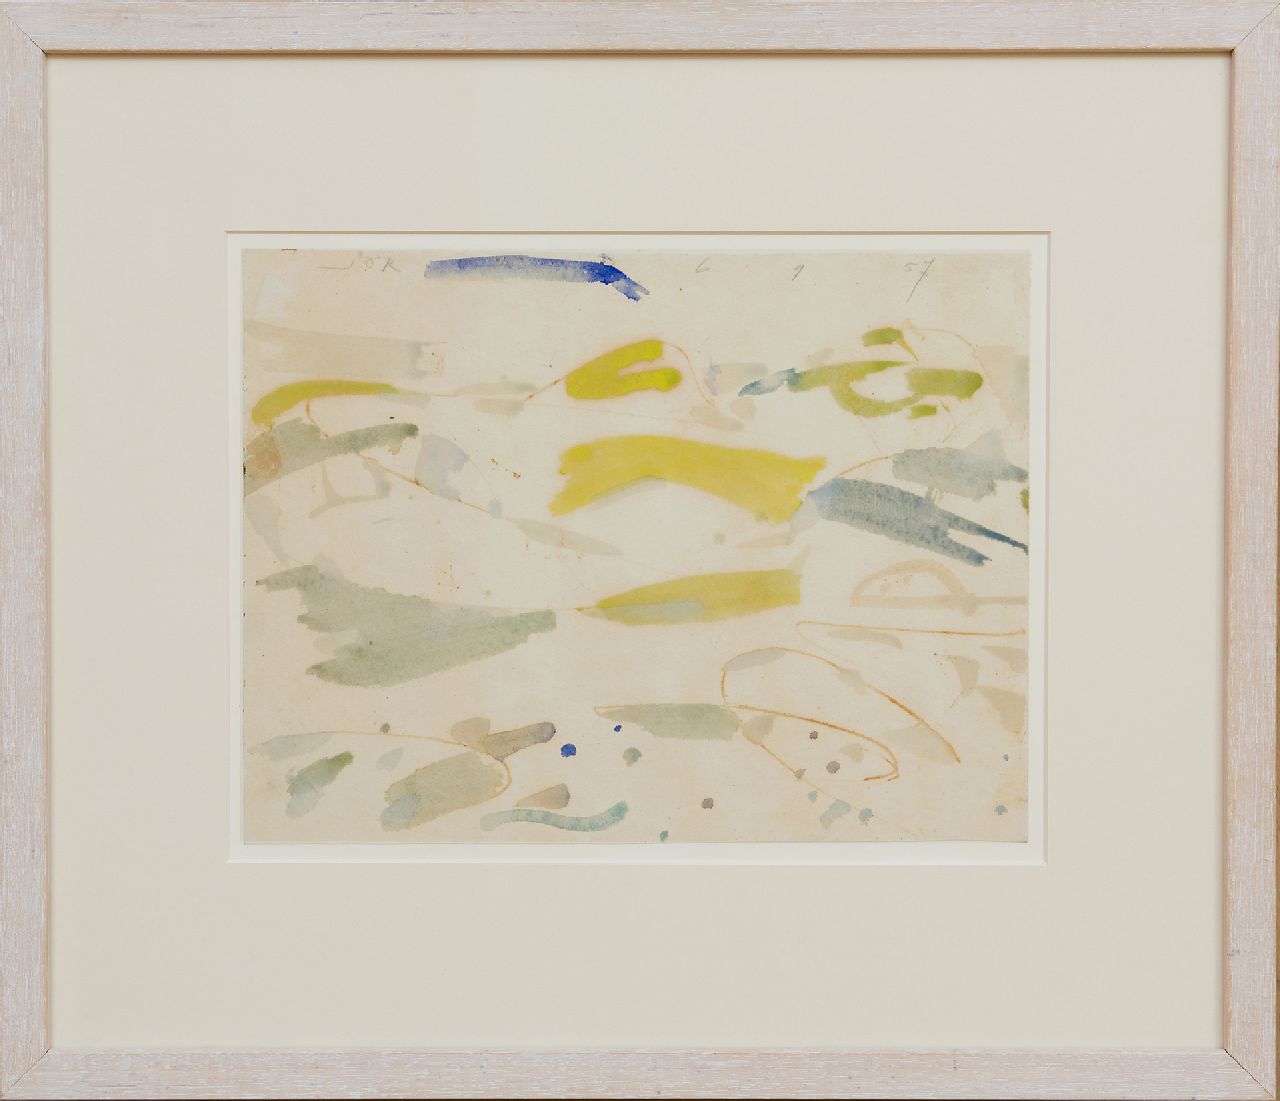 Jordens J.G.  | 'Jan' Gerrit Jordens, Schiermonnikoog, watercolour and ecolyn on paper 23.6 x 31.1 cm, signed u.l. and dated 6 9 57